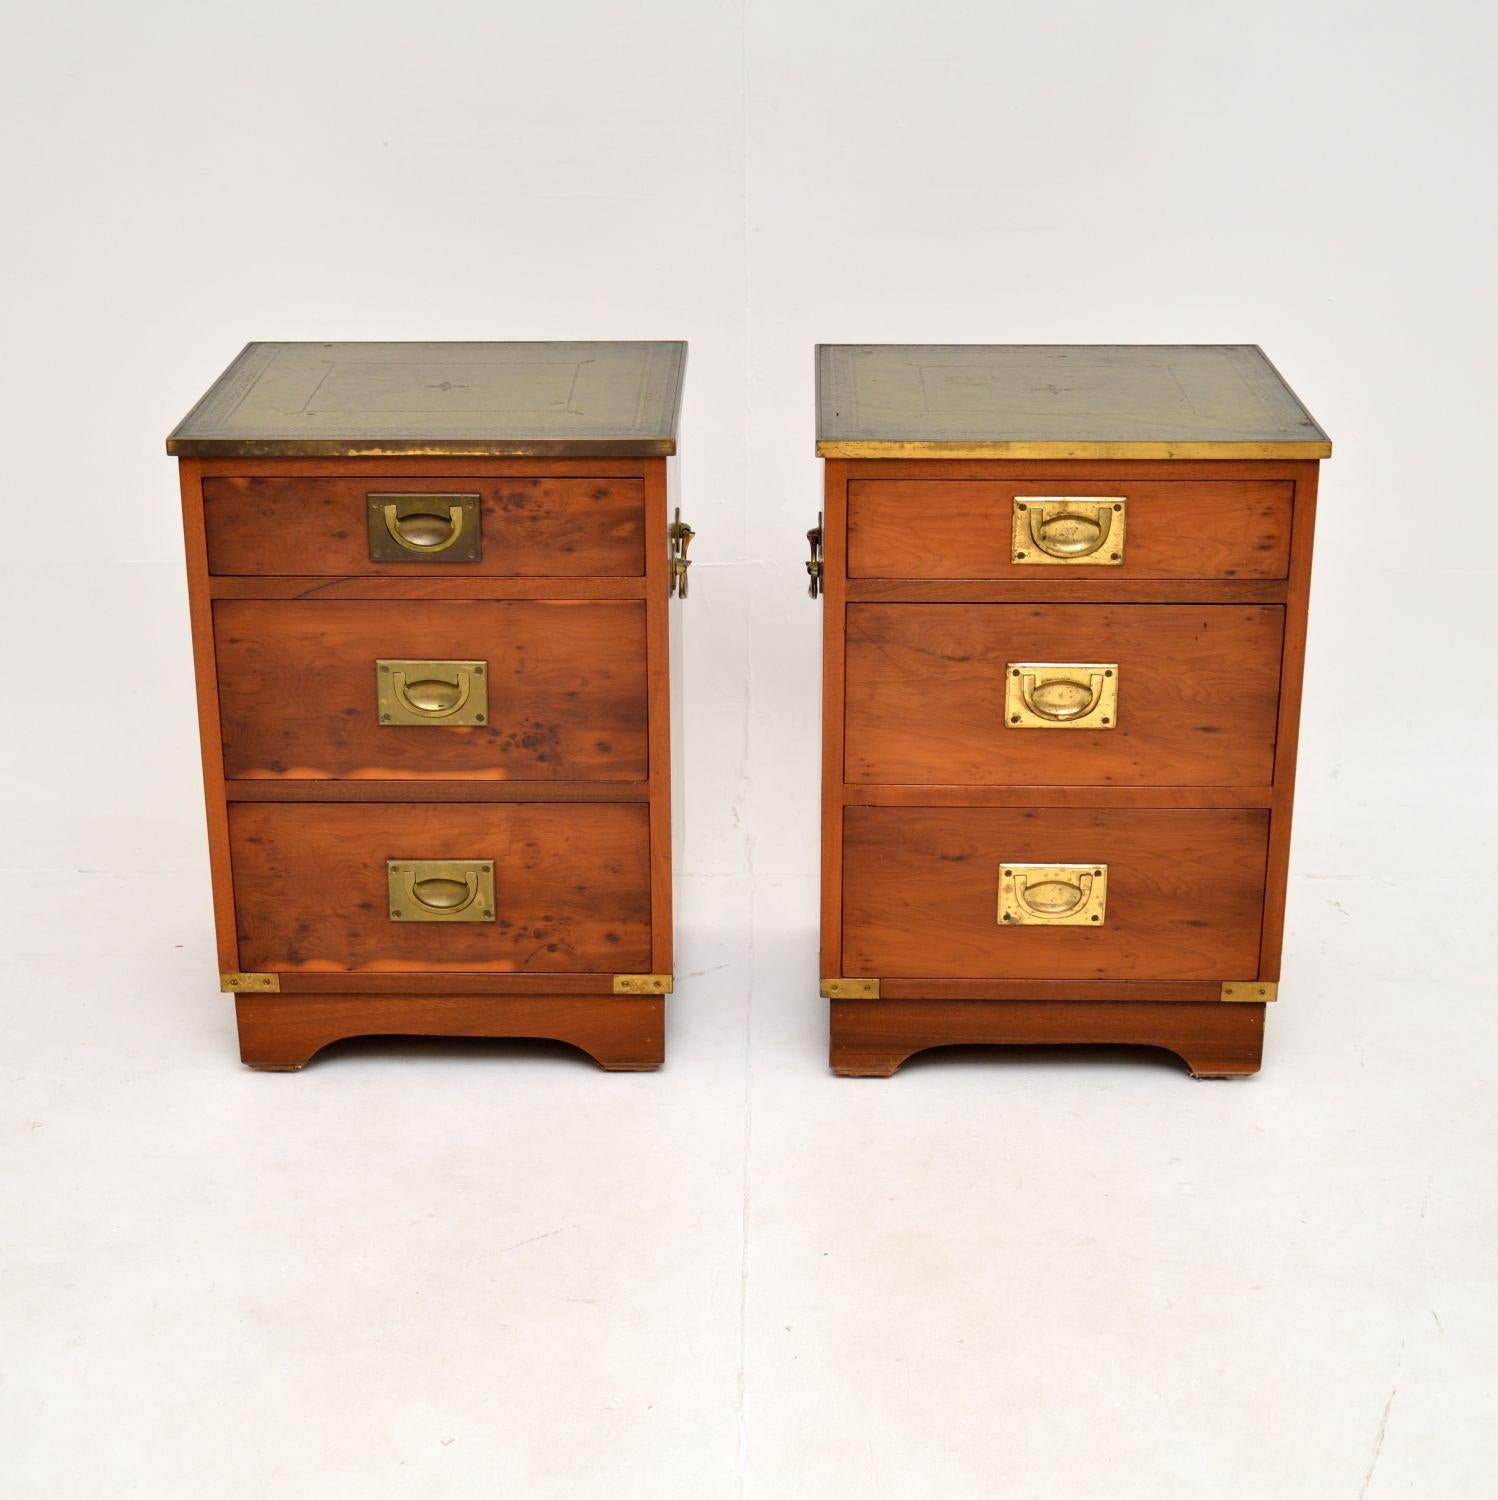 A smart and very well made pair of antique yew wood military campaign bedside chests with leather tops. They were made in England, they date from around the 1950’s.

They are of superb quality and are a very useful size. The yew wood has a lovely